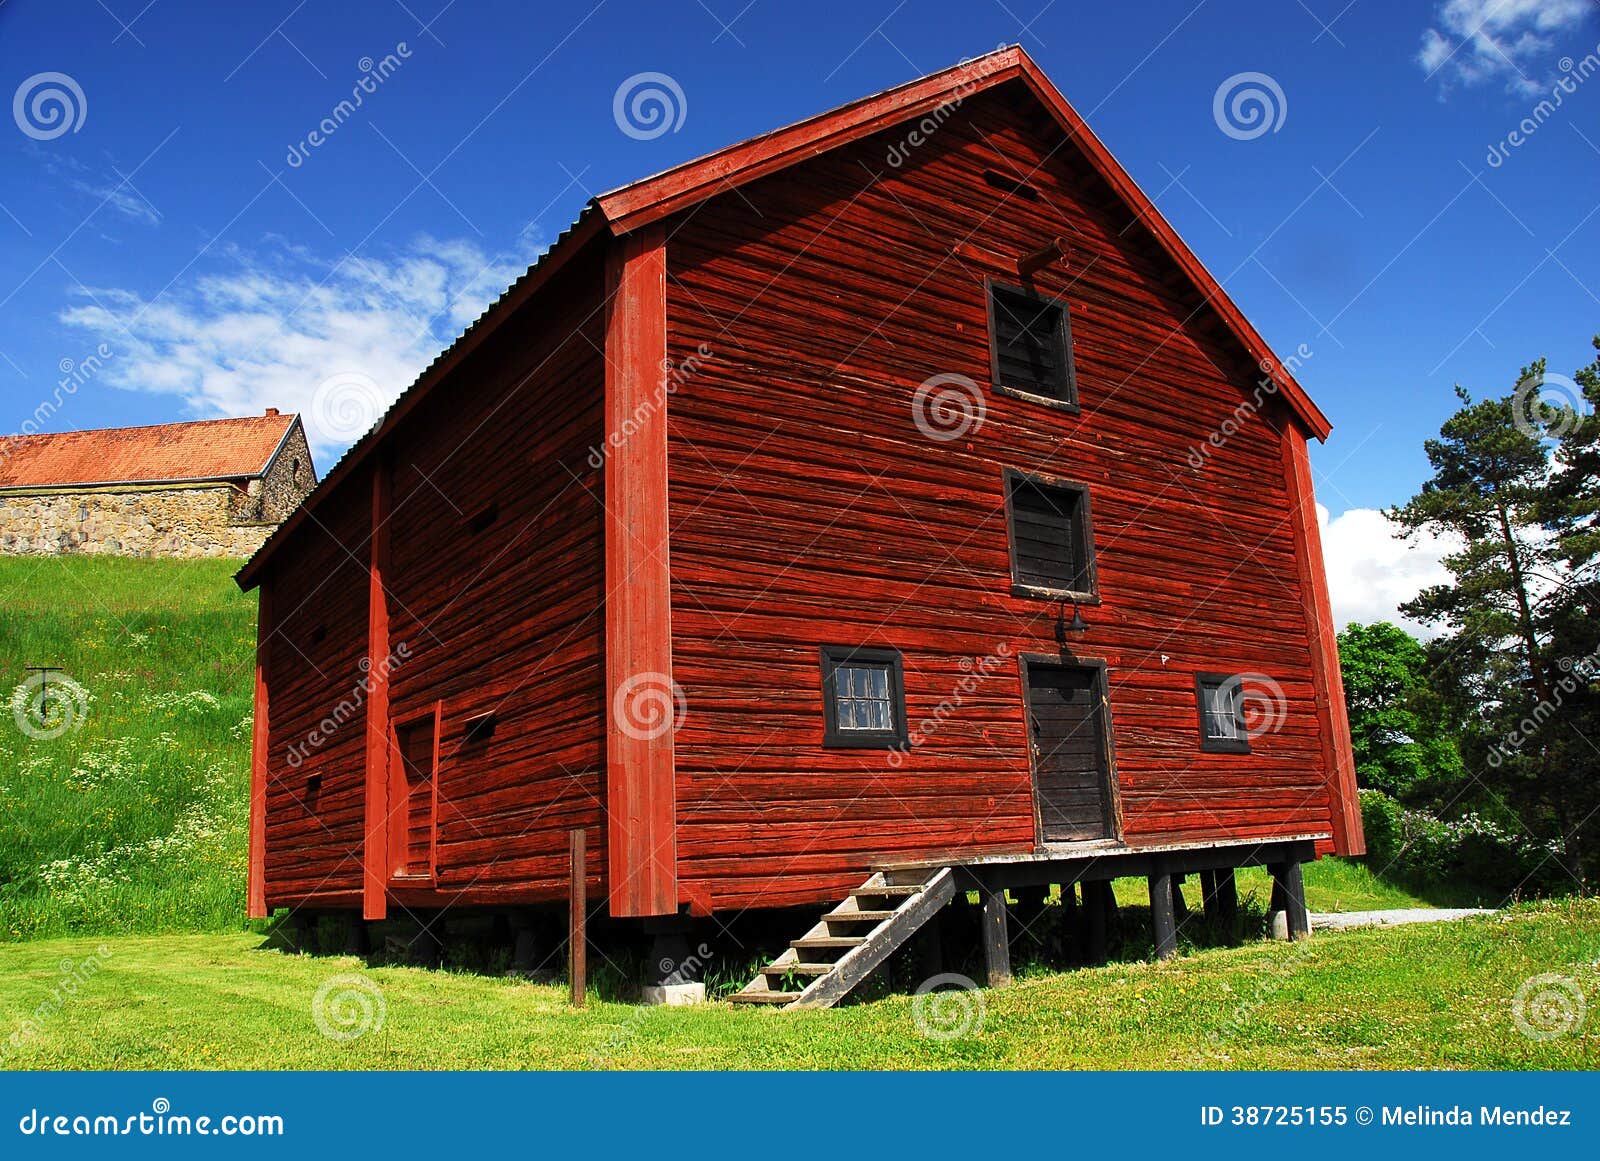 Old Style Barn Royalty Free Stock Photo - Image: 38725155